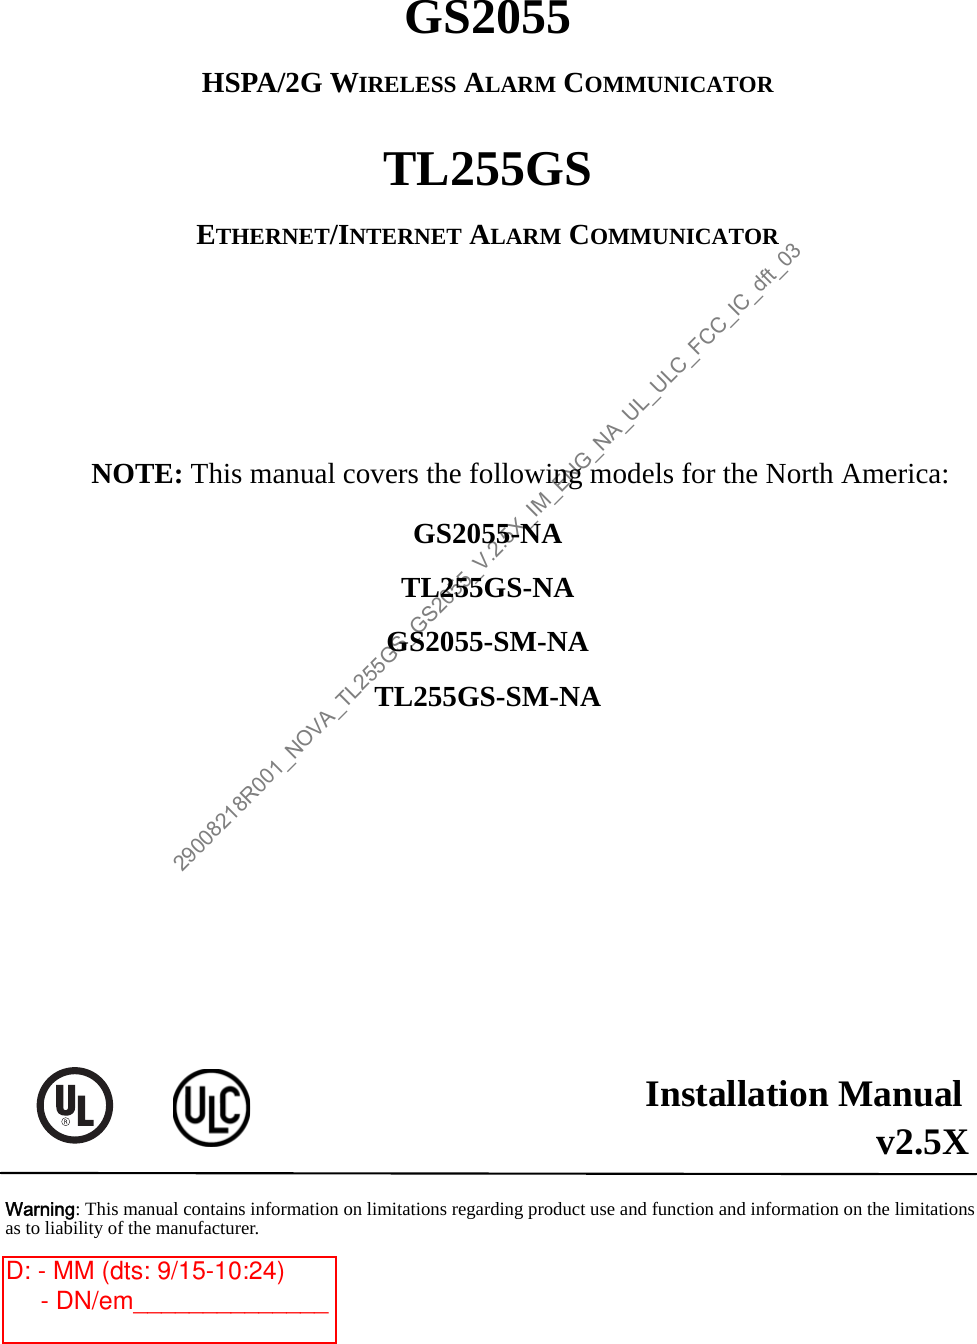 GS2055HSPA/2G WIRELESS ALARM COMMUNICATORTL255GSETHERNET/INTERNET ALARM COMMUNICATORInstallation Manualv2.5XWarning: This manual contains information on limitations regarding product use and function and information on the limitationsas to liability of the manufacturer.NOTE: This manual covers the following models for the North America:GS2055-NATL255GS-NAGS2055-SM-NATL255GS-SM-NA29008218R001_NOVA_TL255GS_GS2055_V.2.5X_IM_ENG_NA_UL_ULC_FCC_IC_dft_03D: - MM (dts: 9/15-10:24)      - DN/em______________